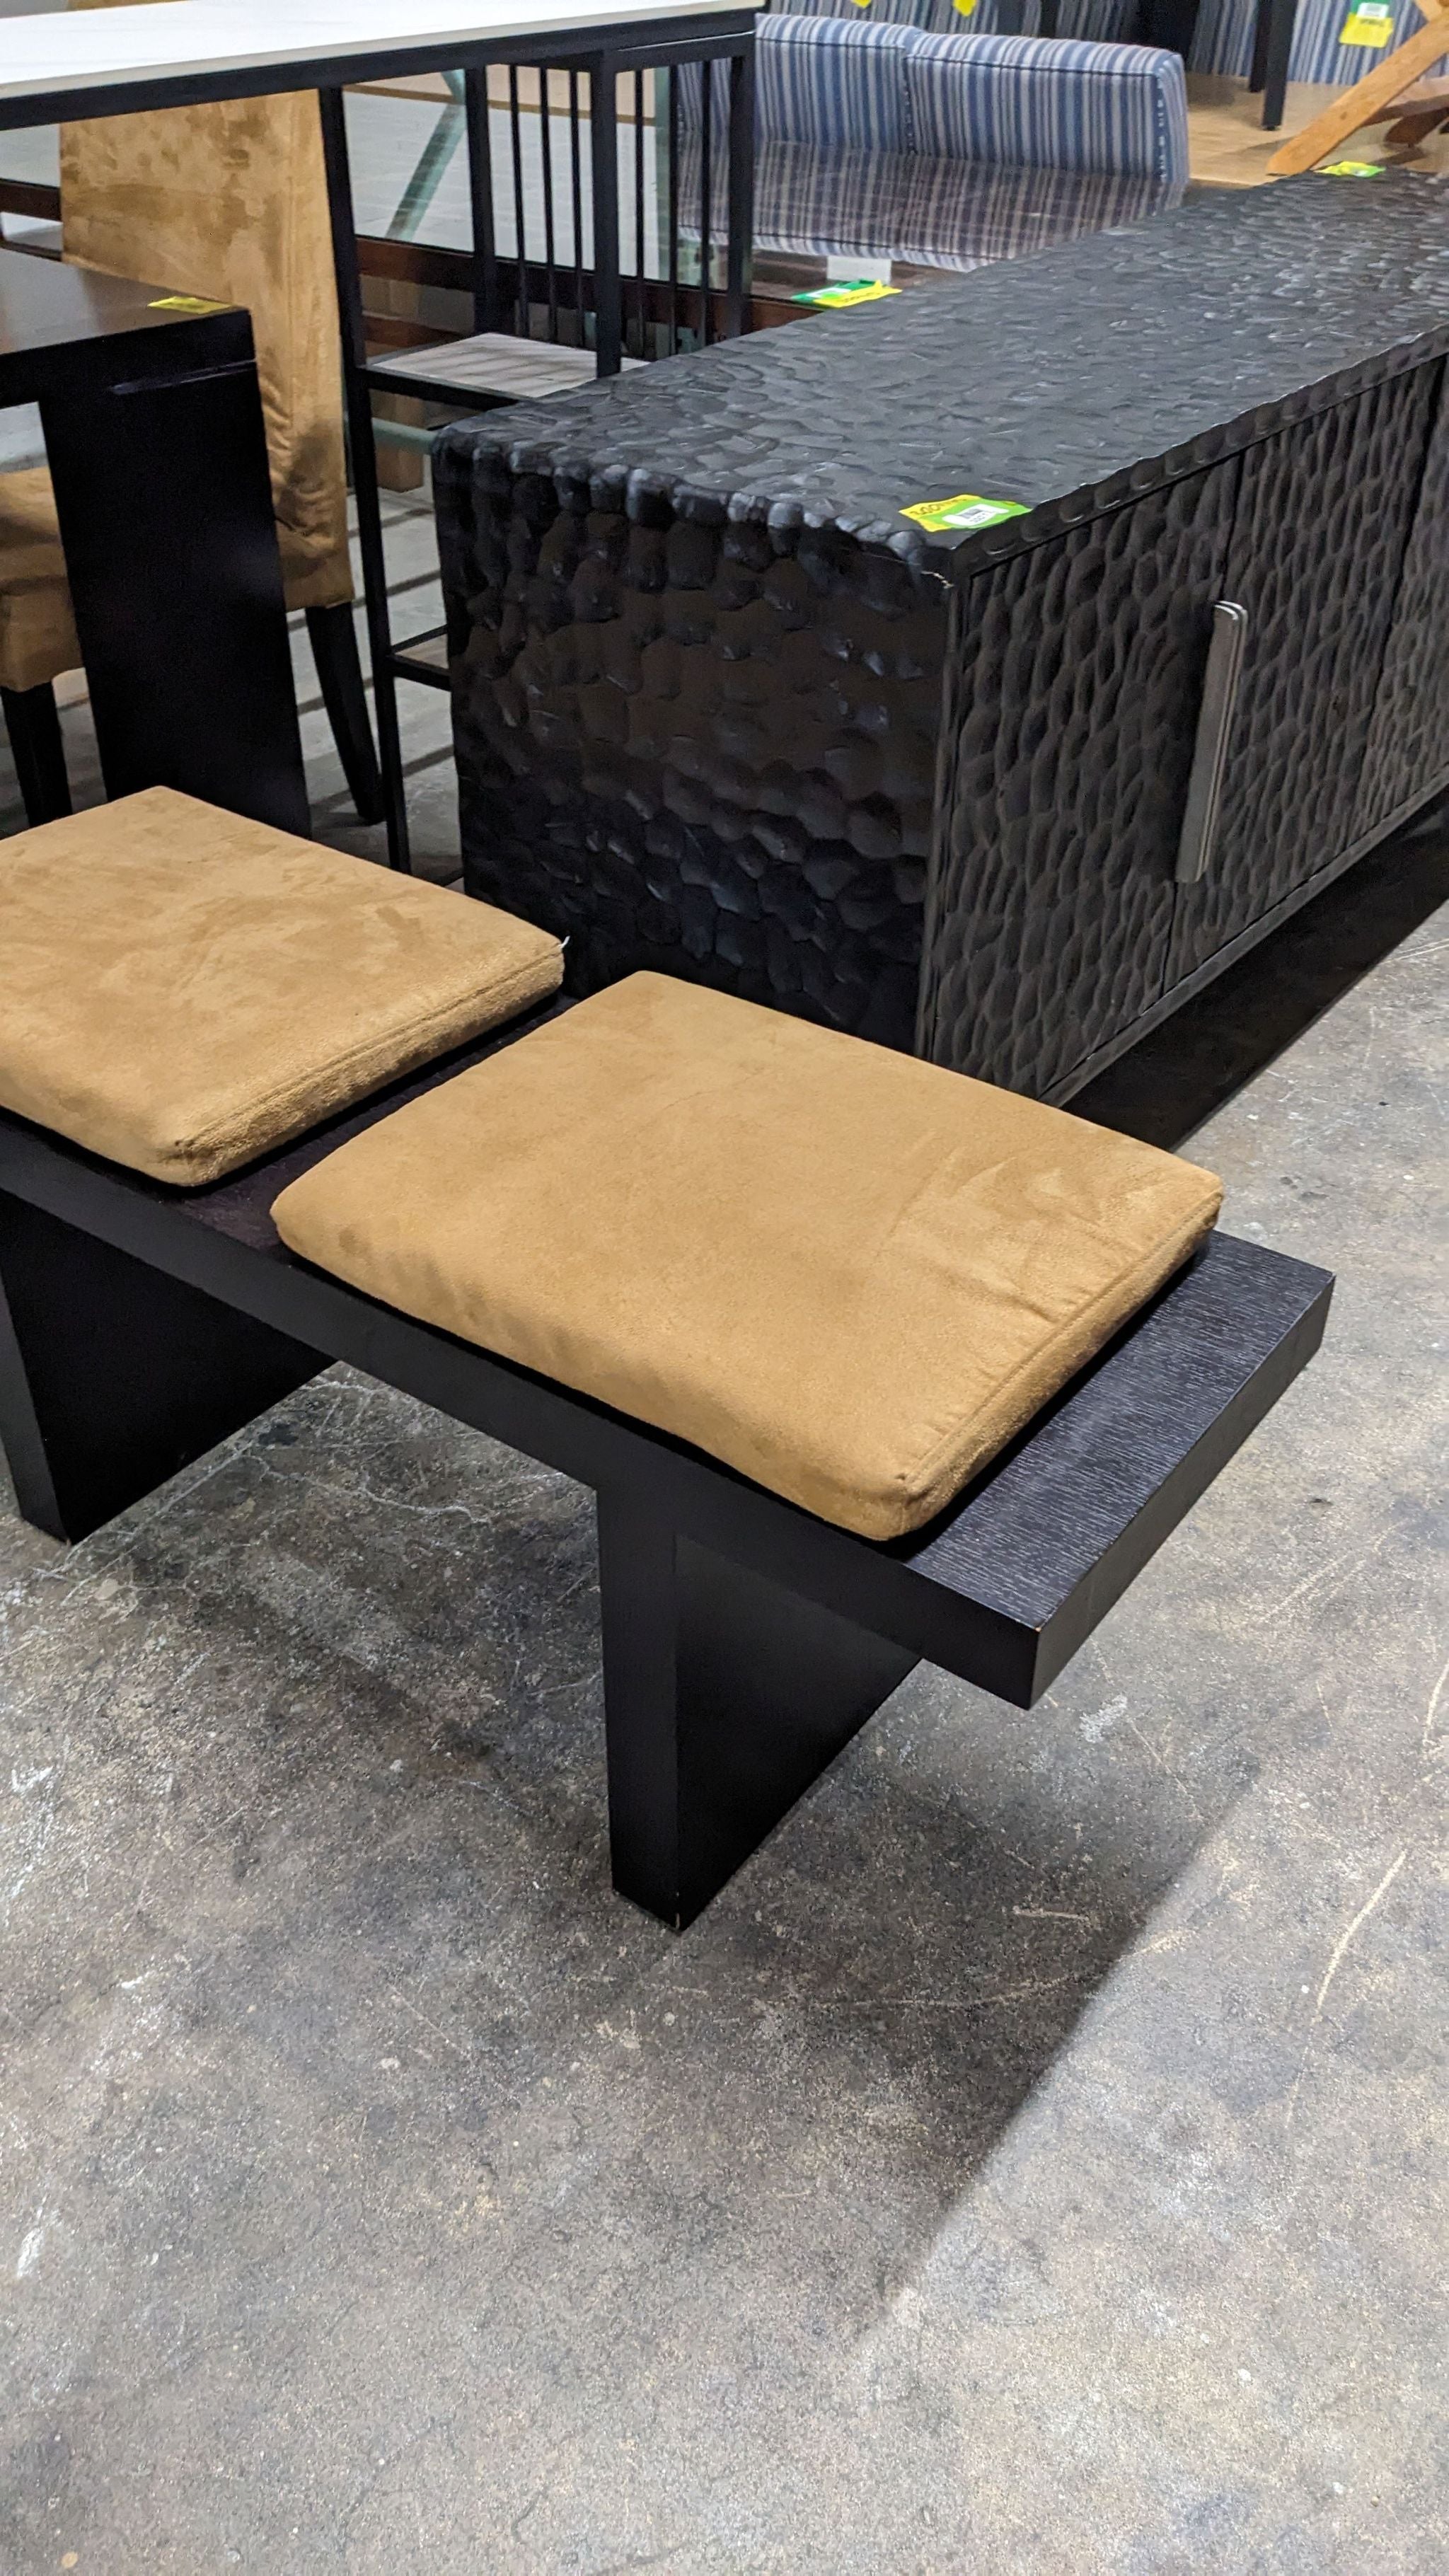 Alt text 2: Black Reperch bench featuring two plush tan seat pads, set against a store backdrop with various furniture items.